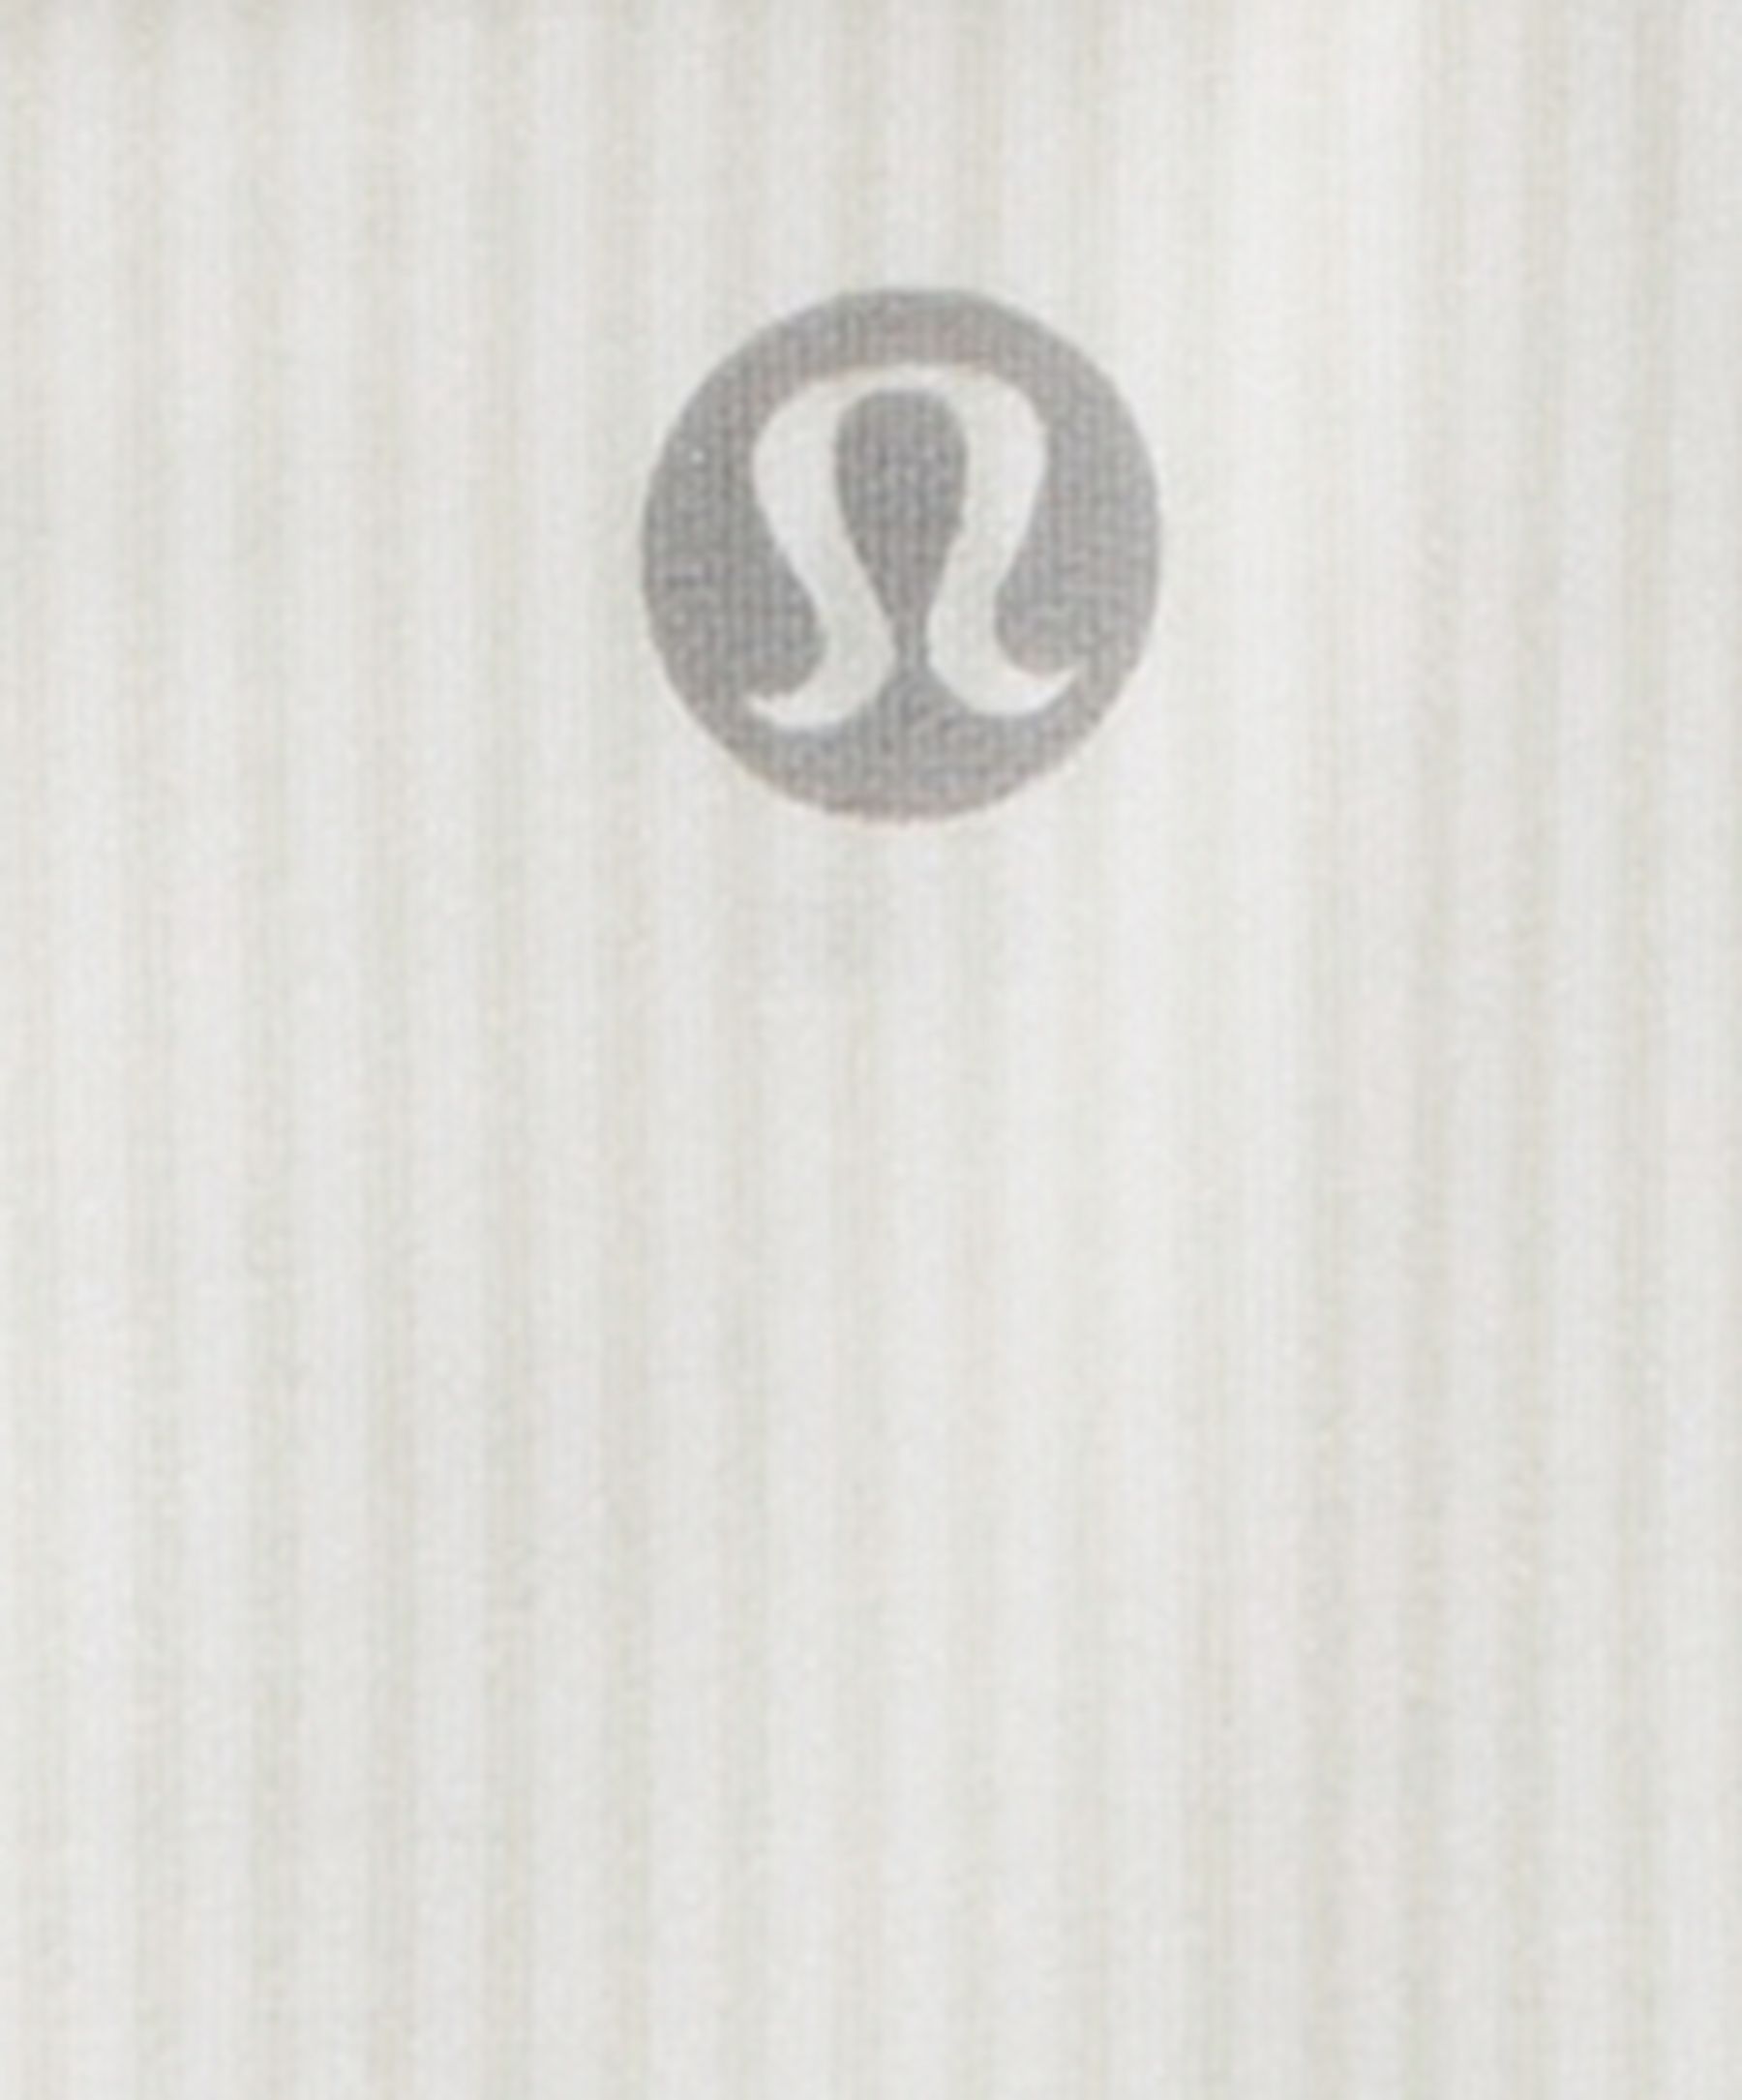 weekly fitness must-have: lululemon thong - The Fitnessista